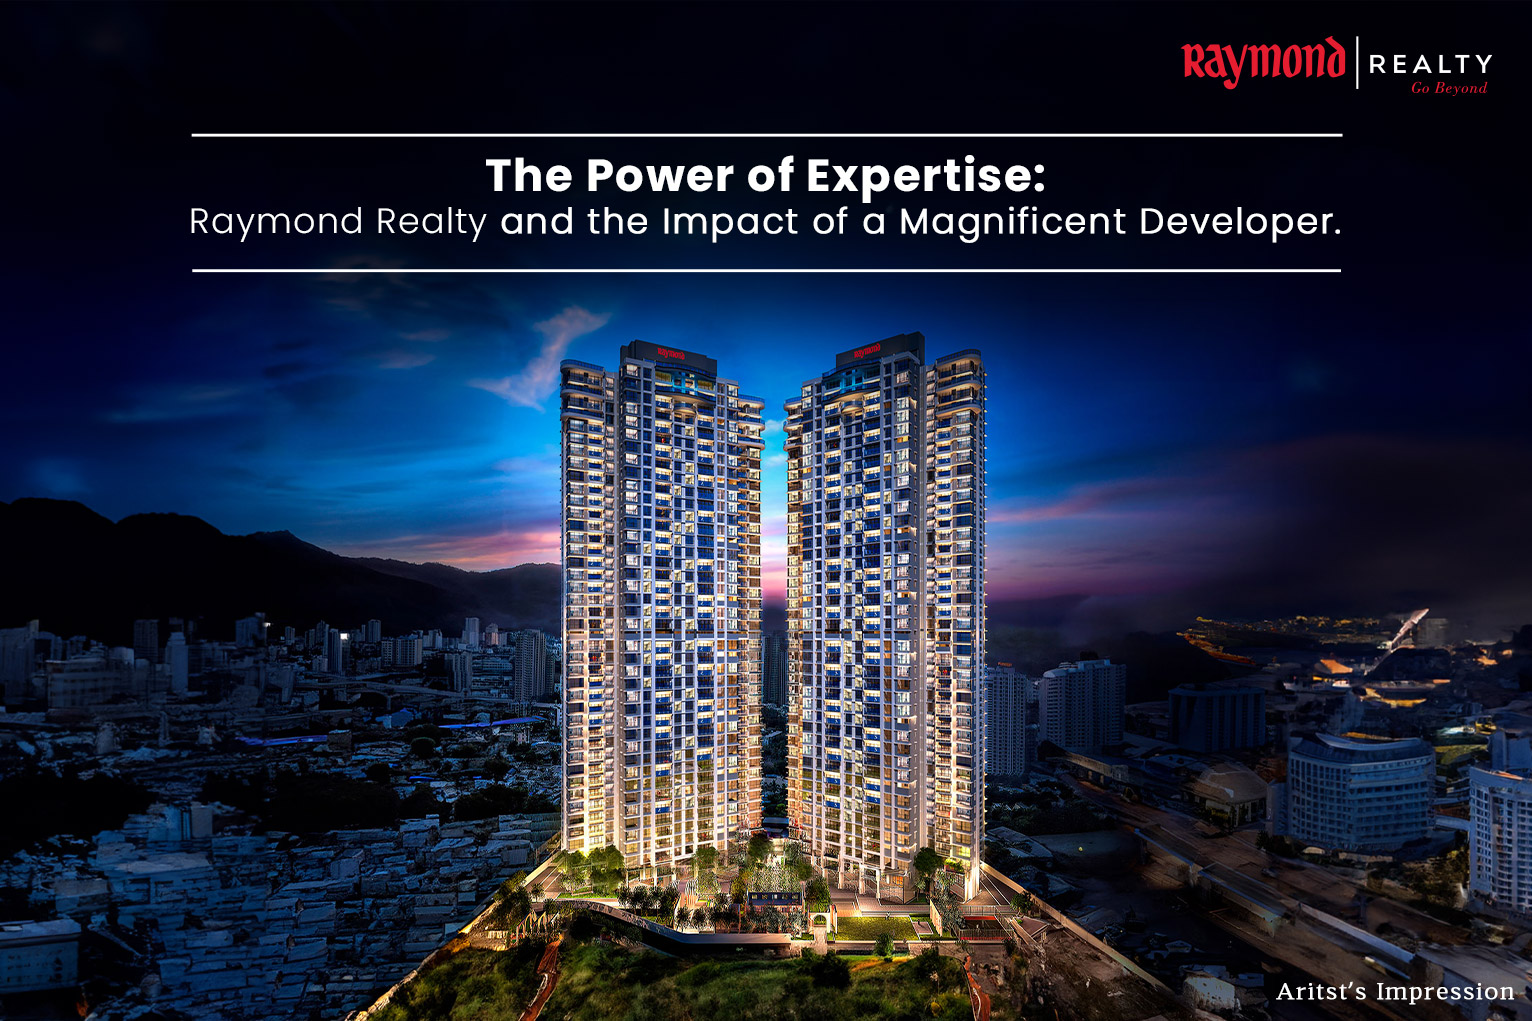  The Power of Expertise: Raymond Realty and The Impact of a Magnificent  Developer